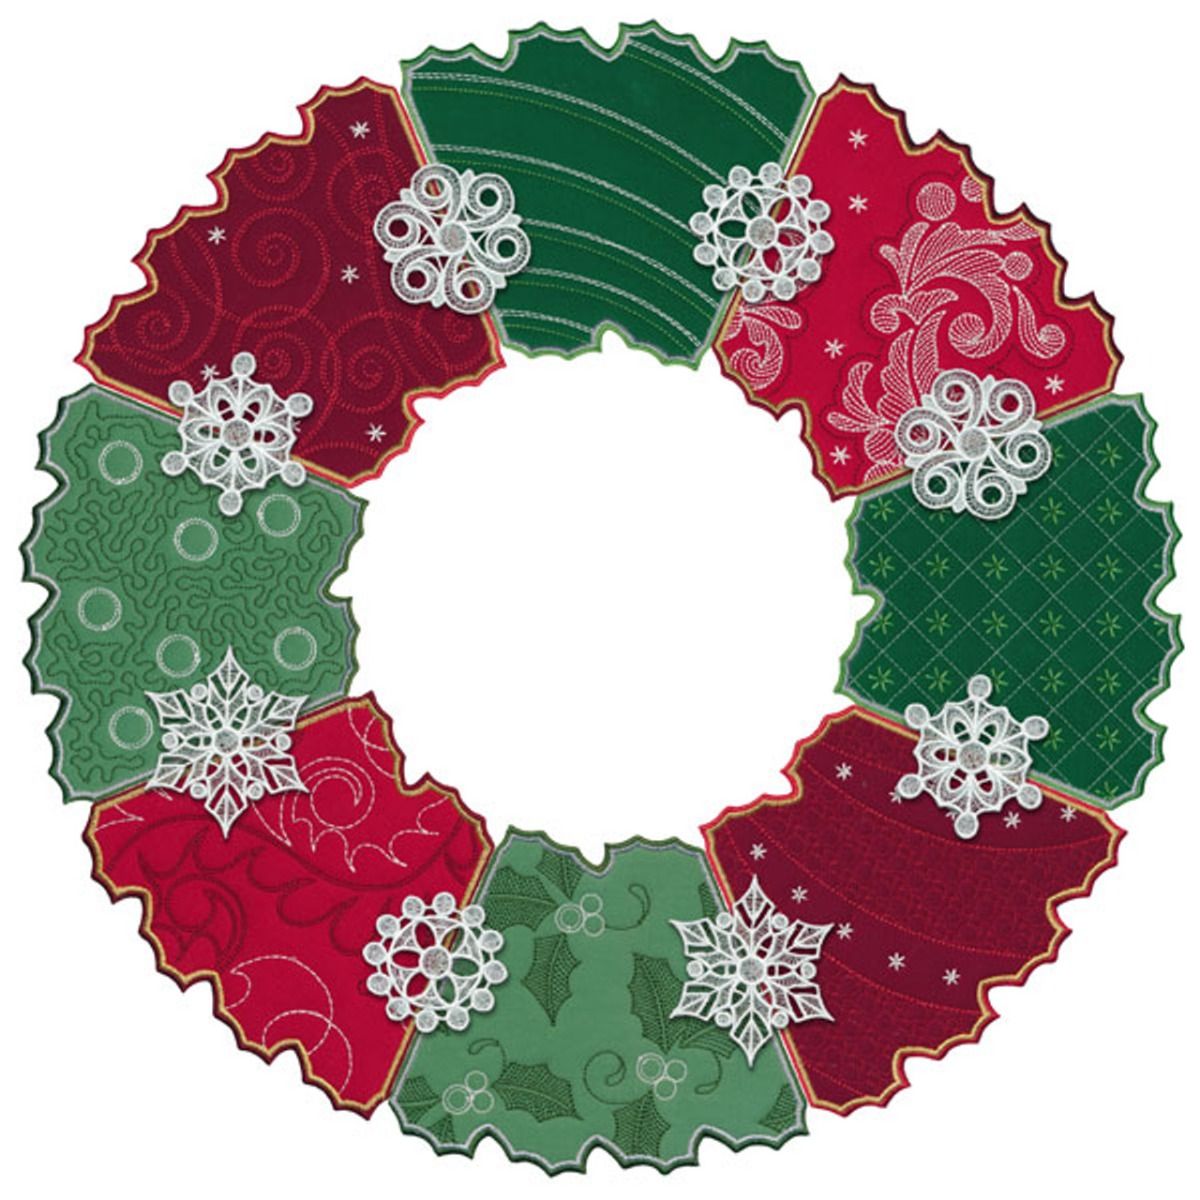 OESD Free Standing Lace Holiday Wreaths,OESD Free Standing Lace Holiday Wreaths